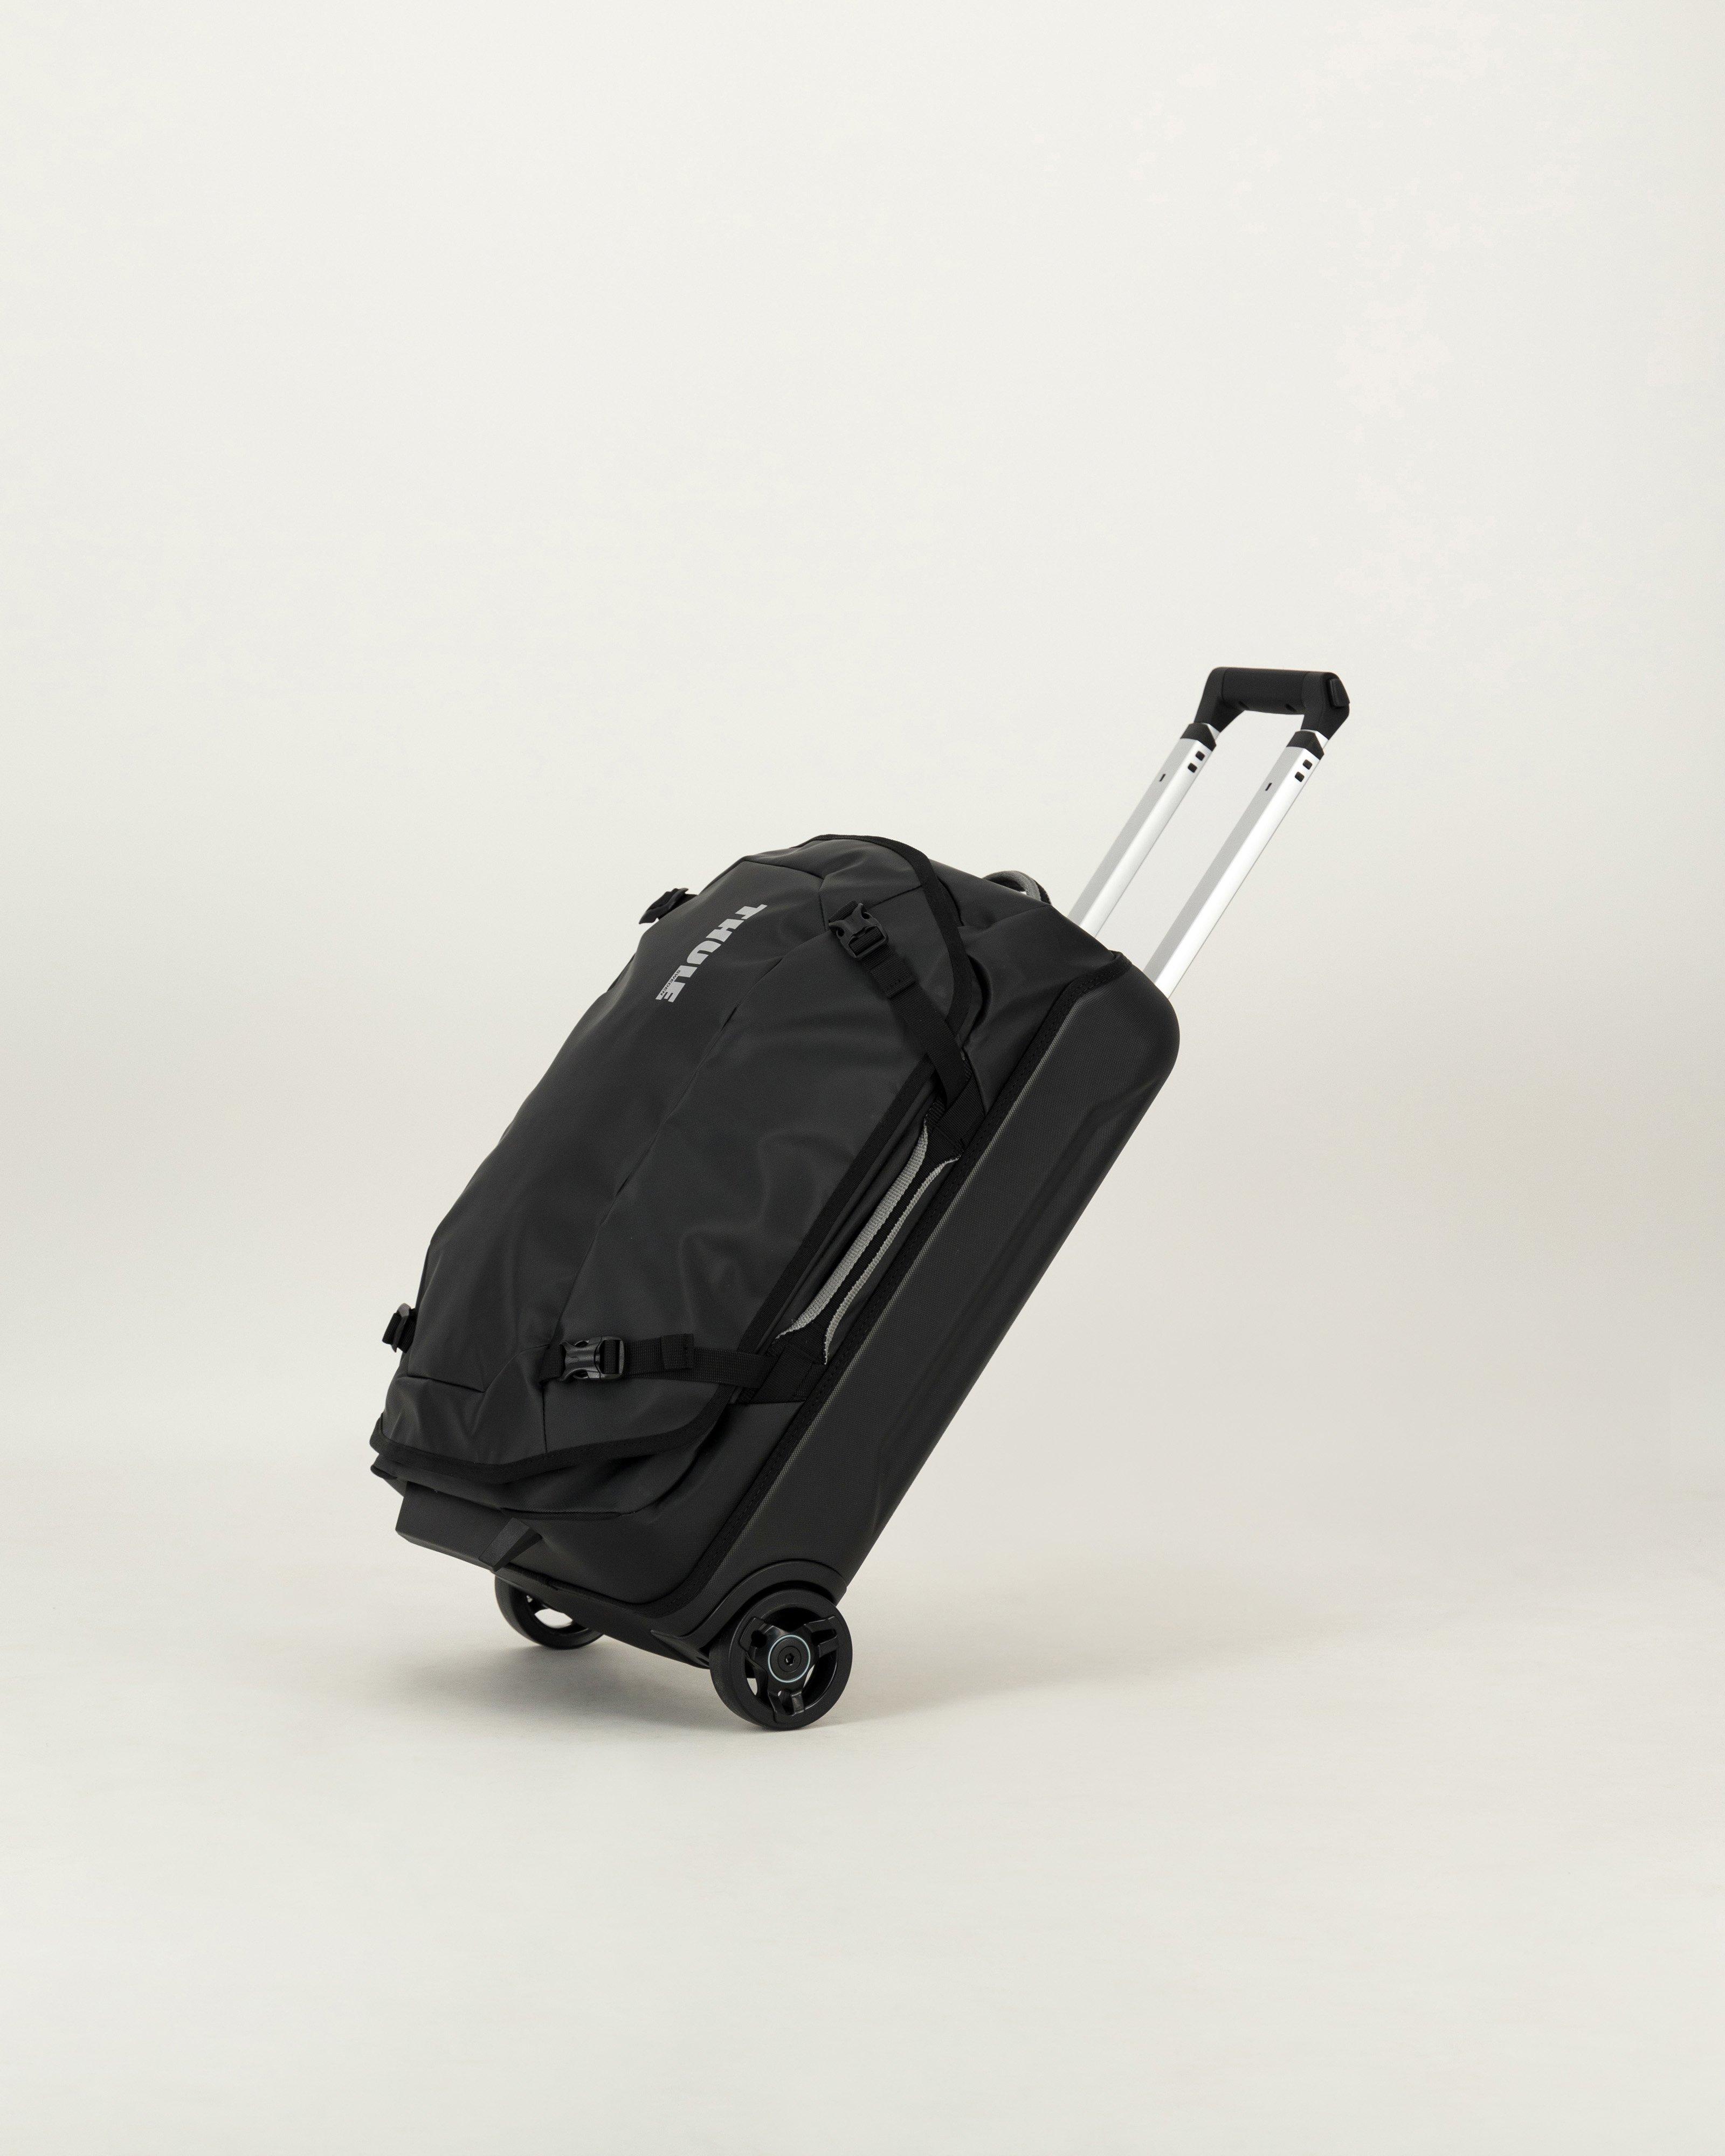 Thule Chasm Carry-On 40L Luggage Roller Bag -  Black